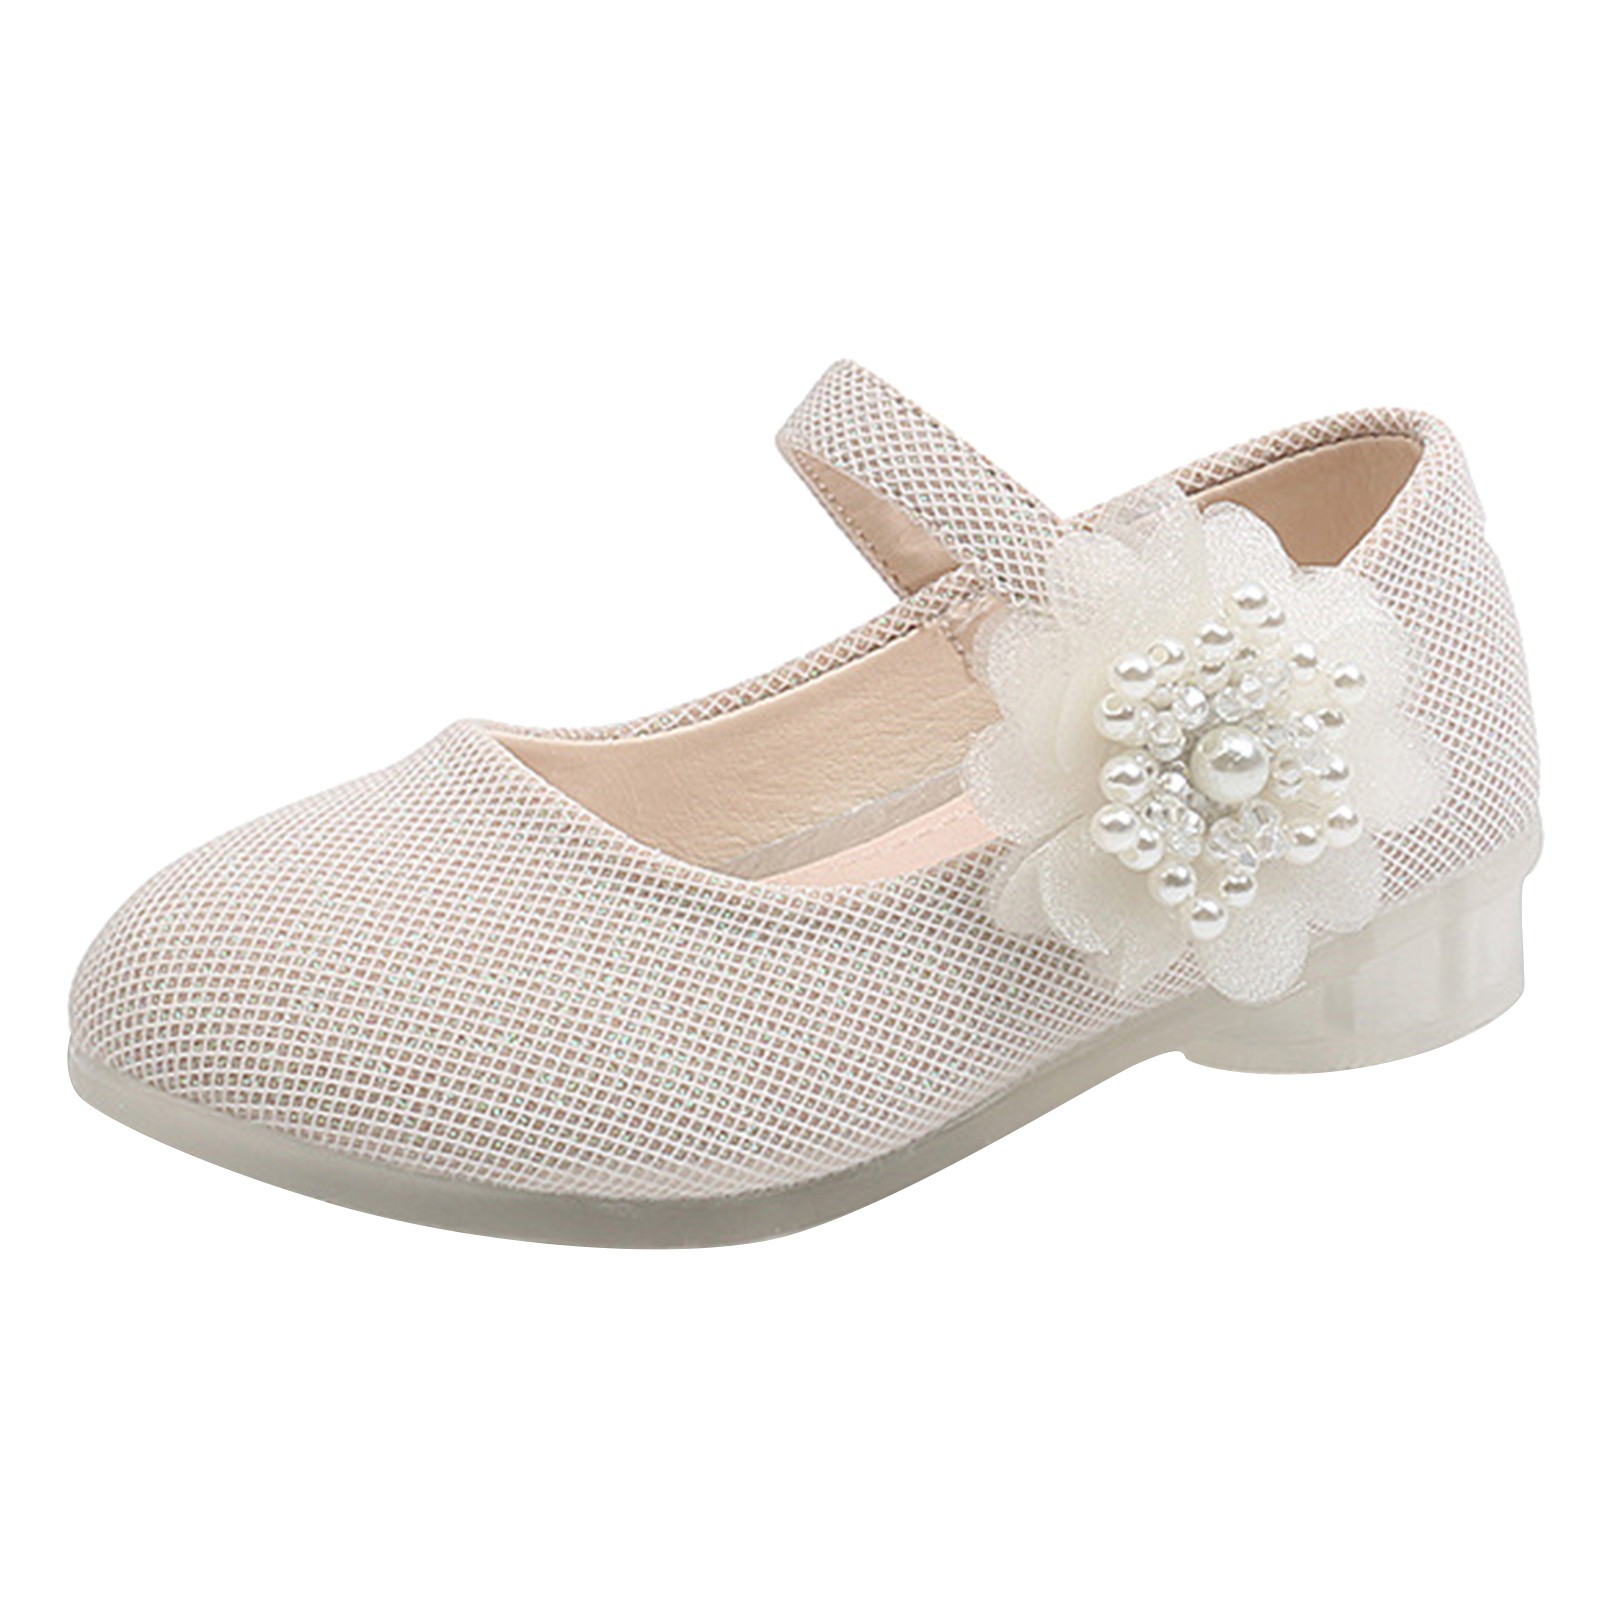 Children Leather Single Shoes Fashion Pearl Big Flower Girl Small ...